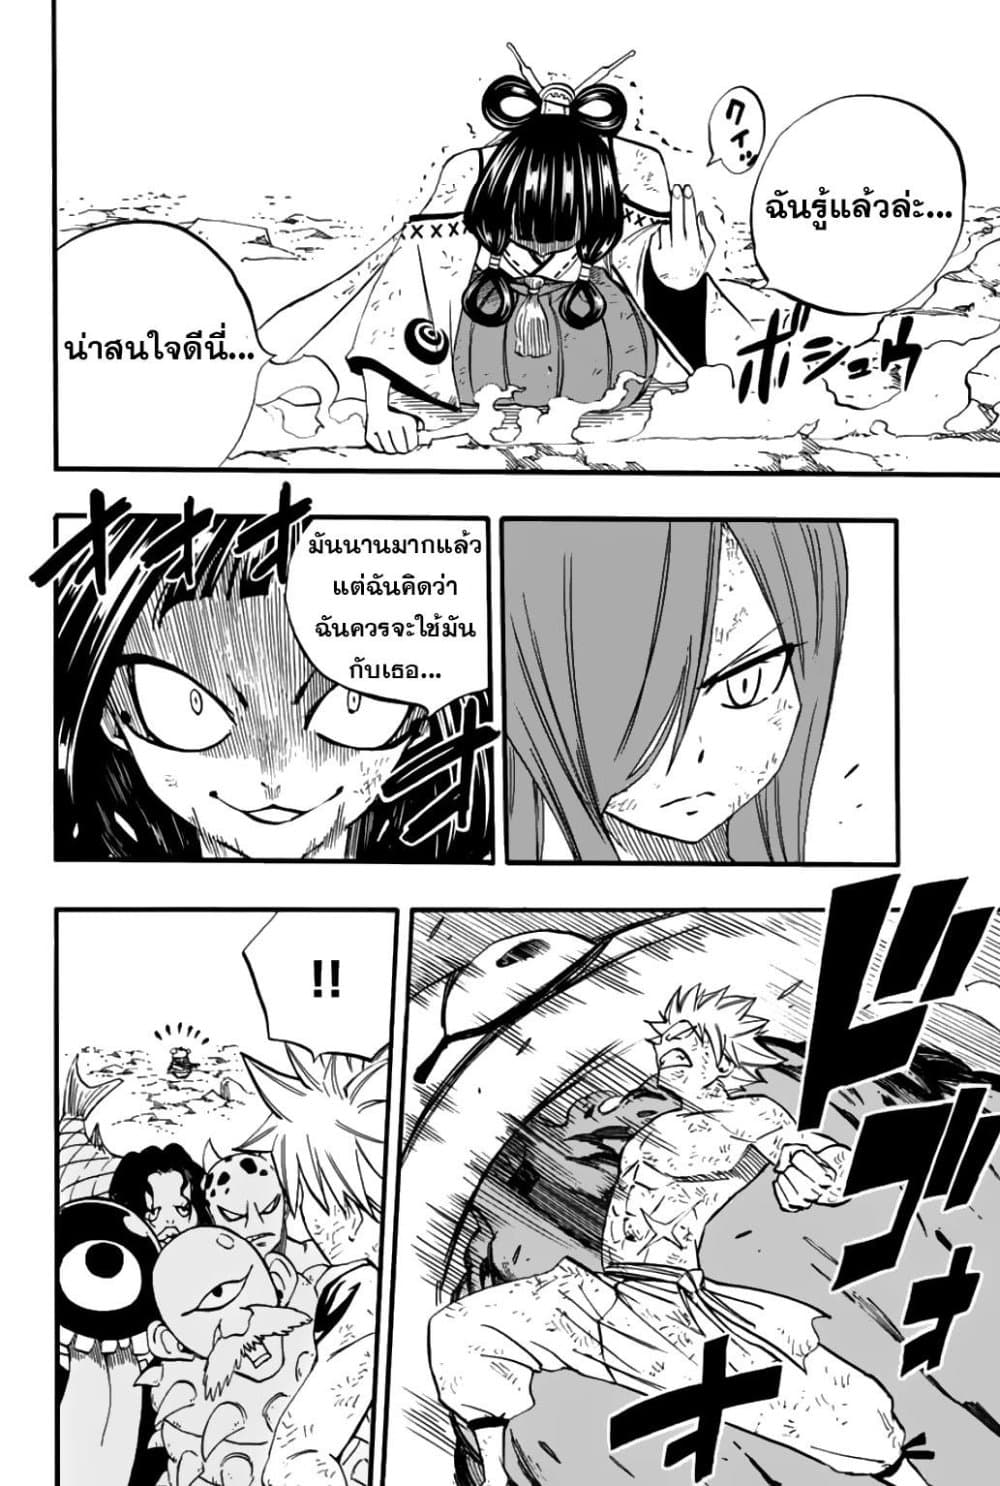 Fairy Tail: 100 Years Quest 79 TH